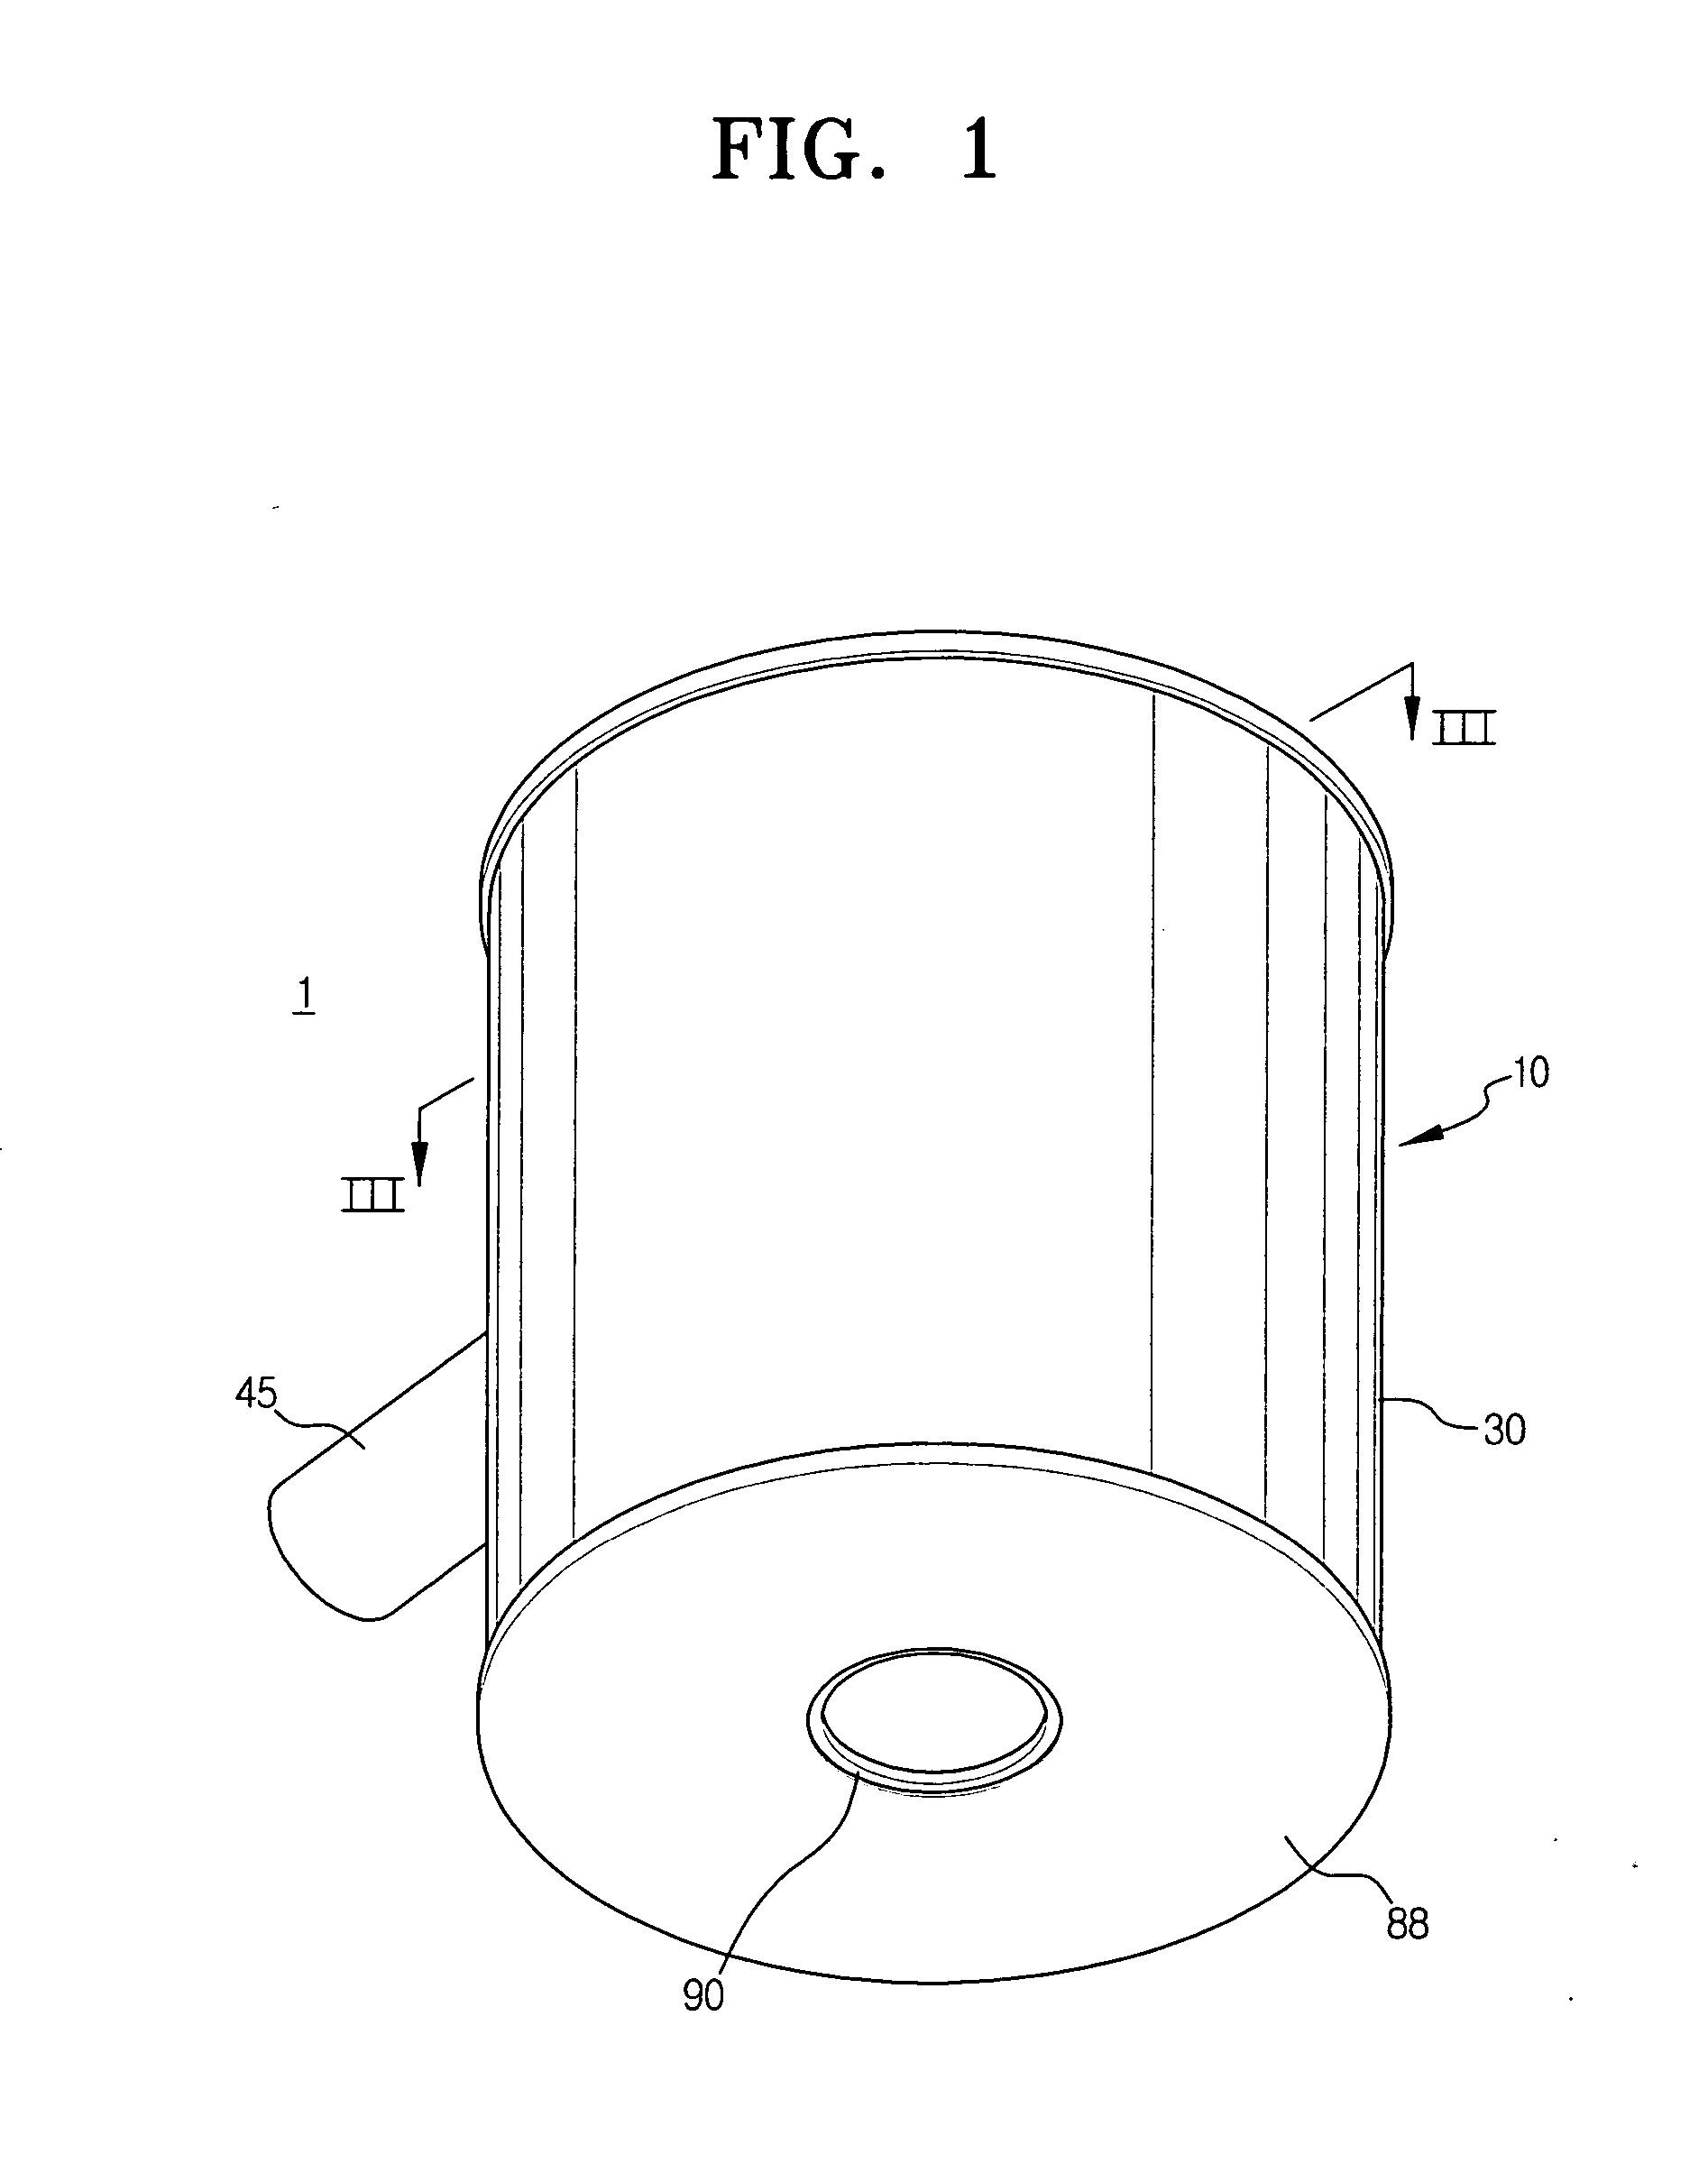 Multi-cyclone dust collector for vacuum cleaner and vacuum cleaner employing the same